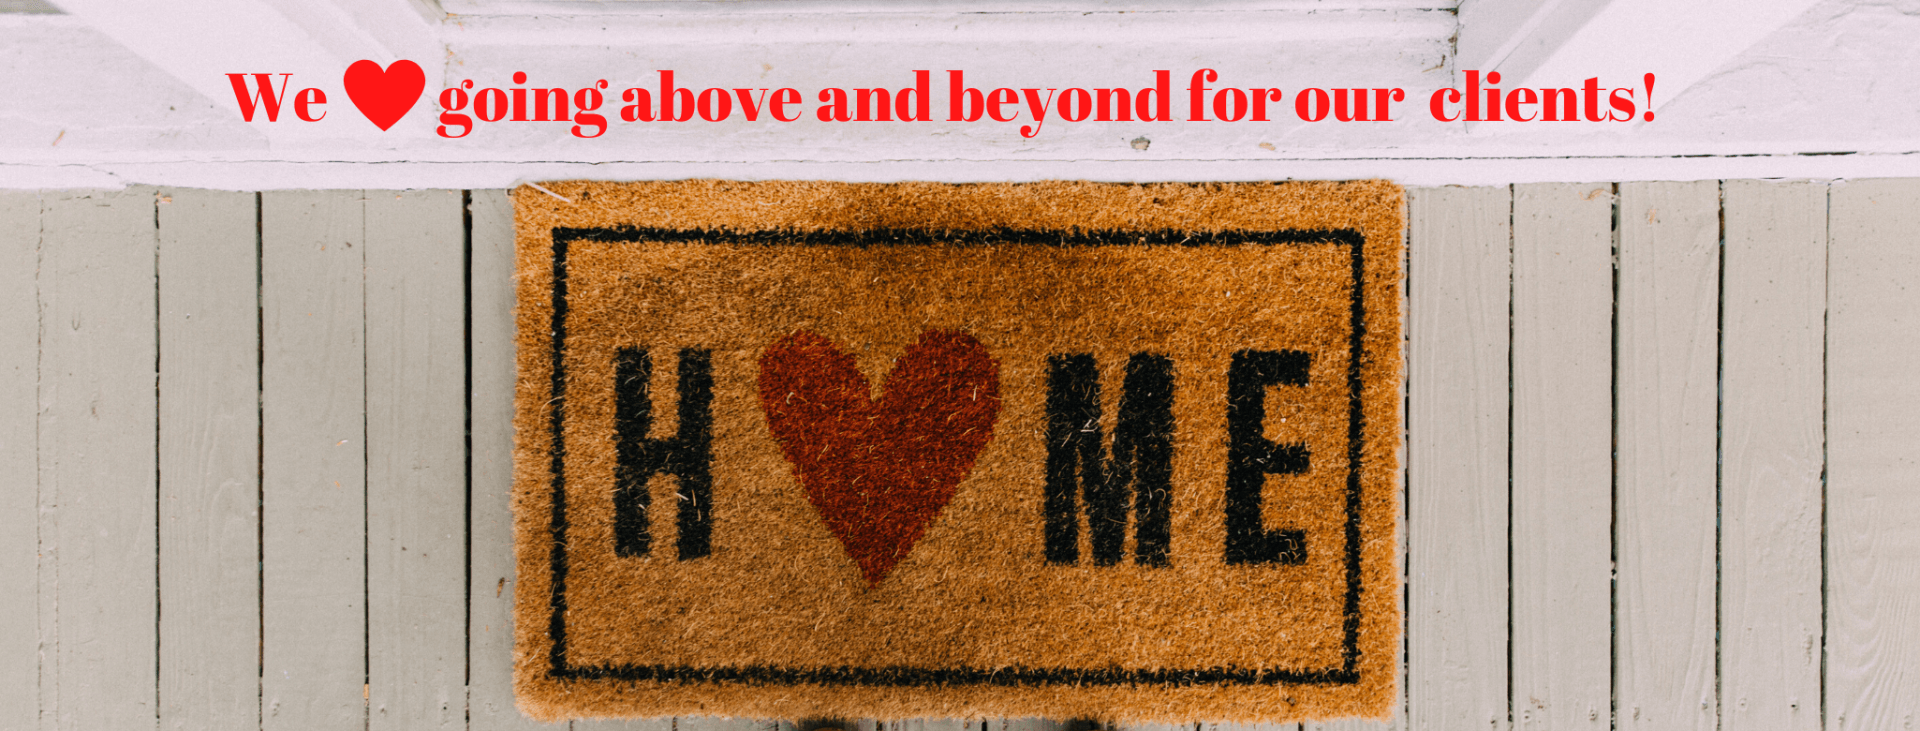 a door mat that says home with a heart on it